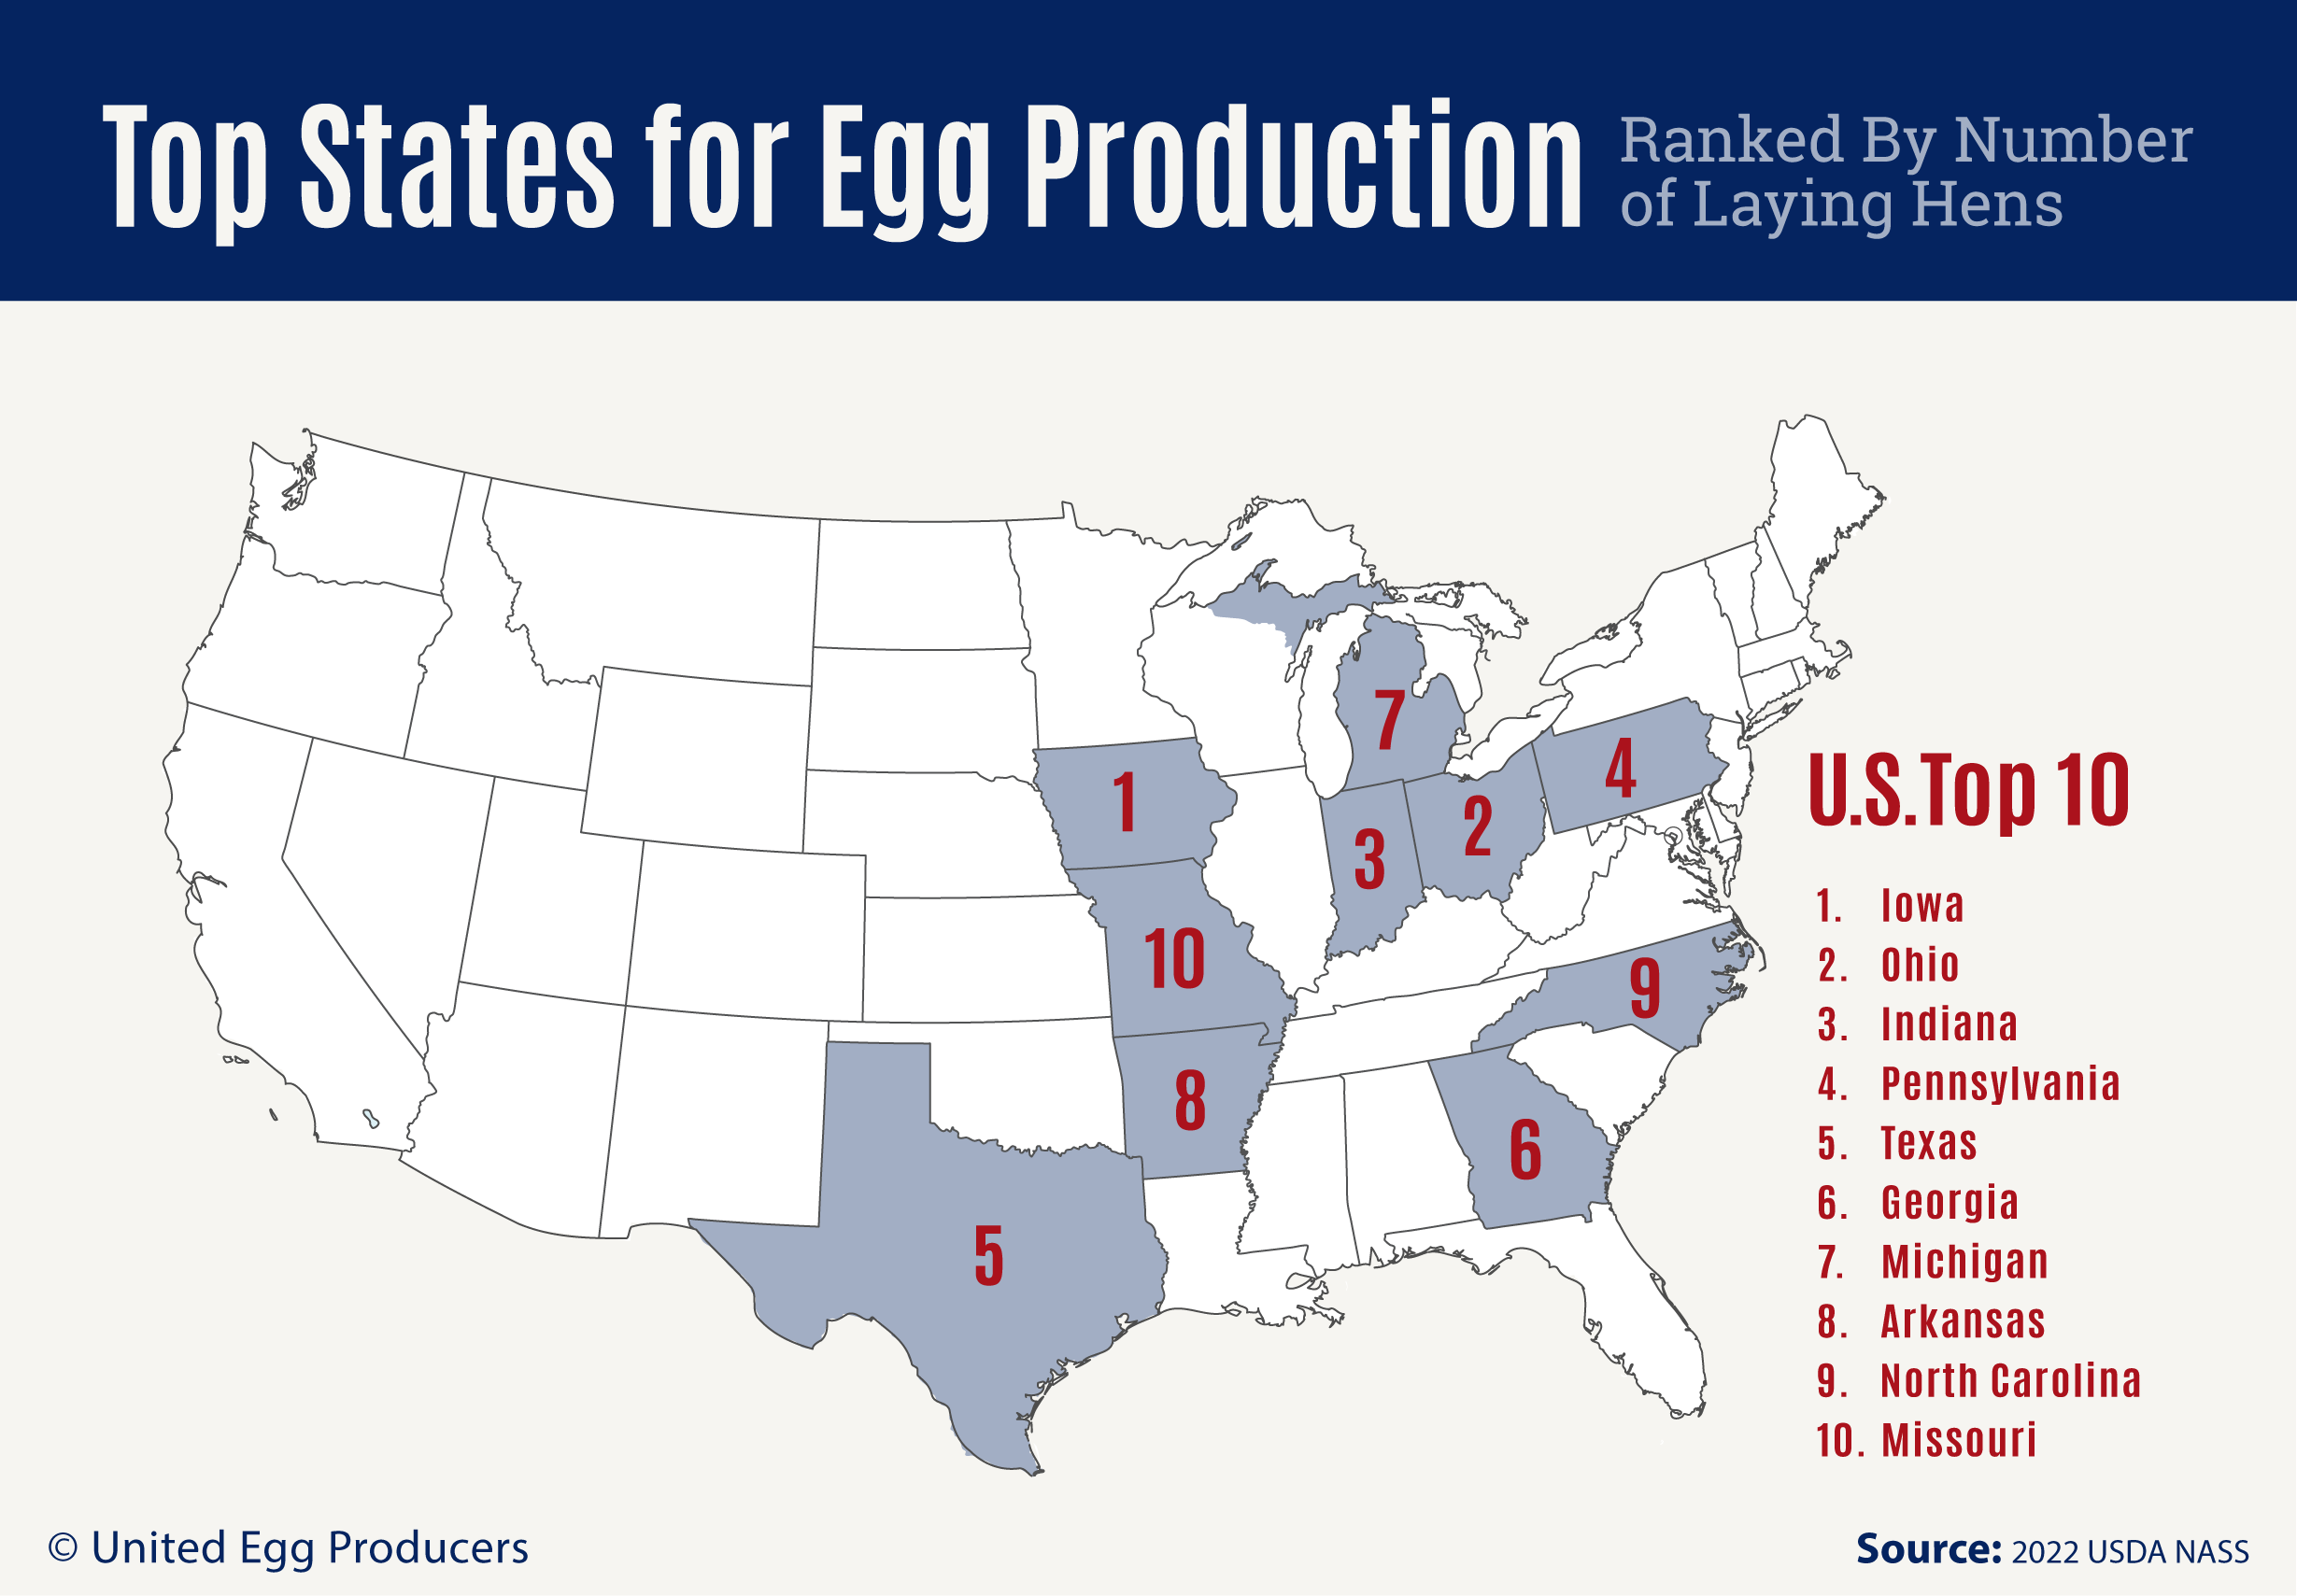 Top states for Egg Production